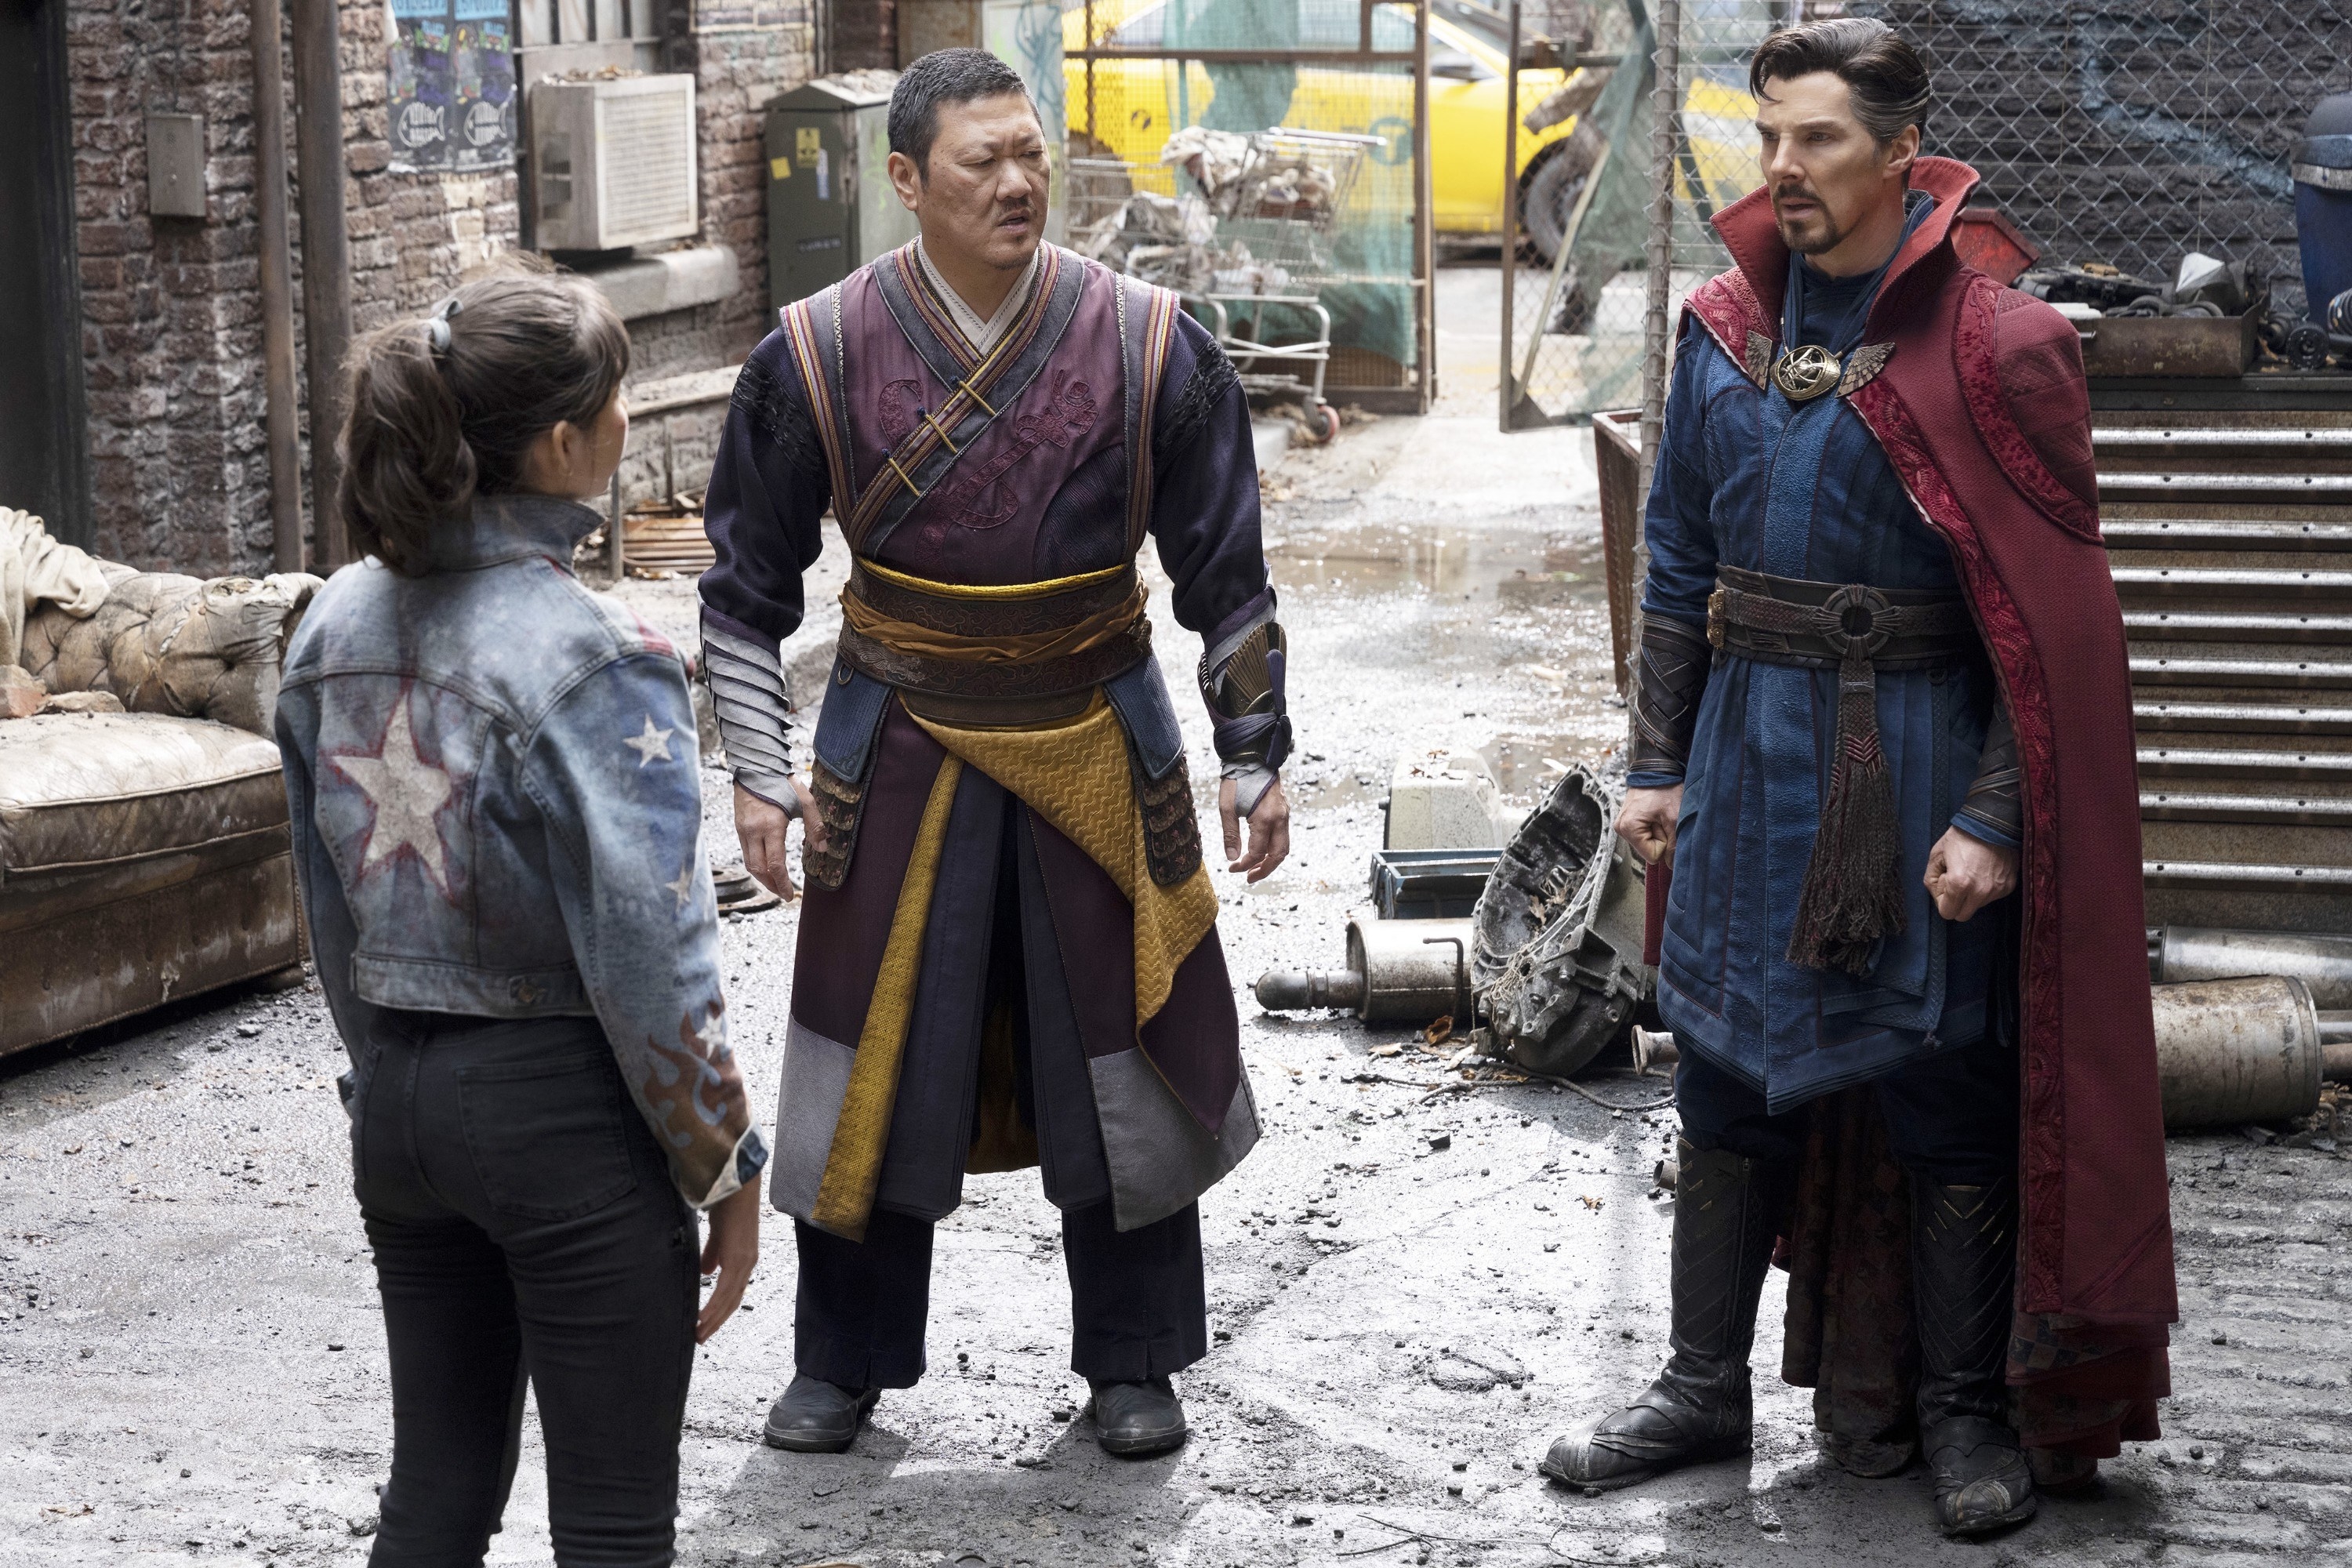 Strange, Wong, and Chavez stand together in an alleyway